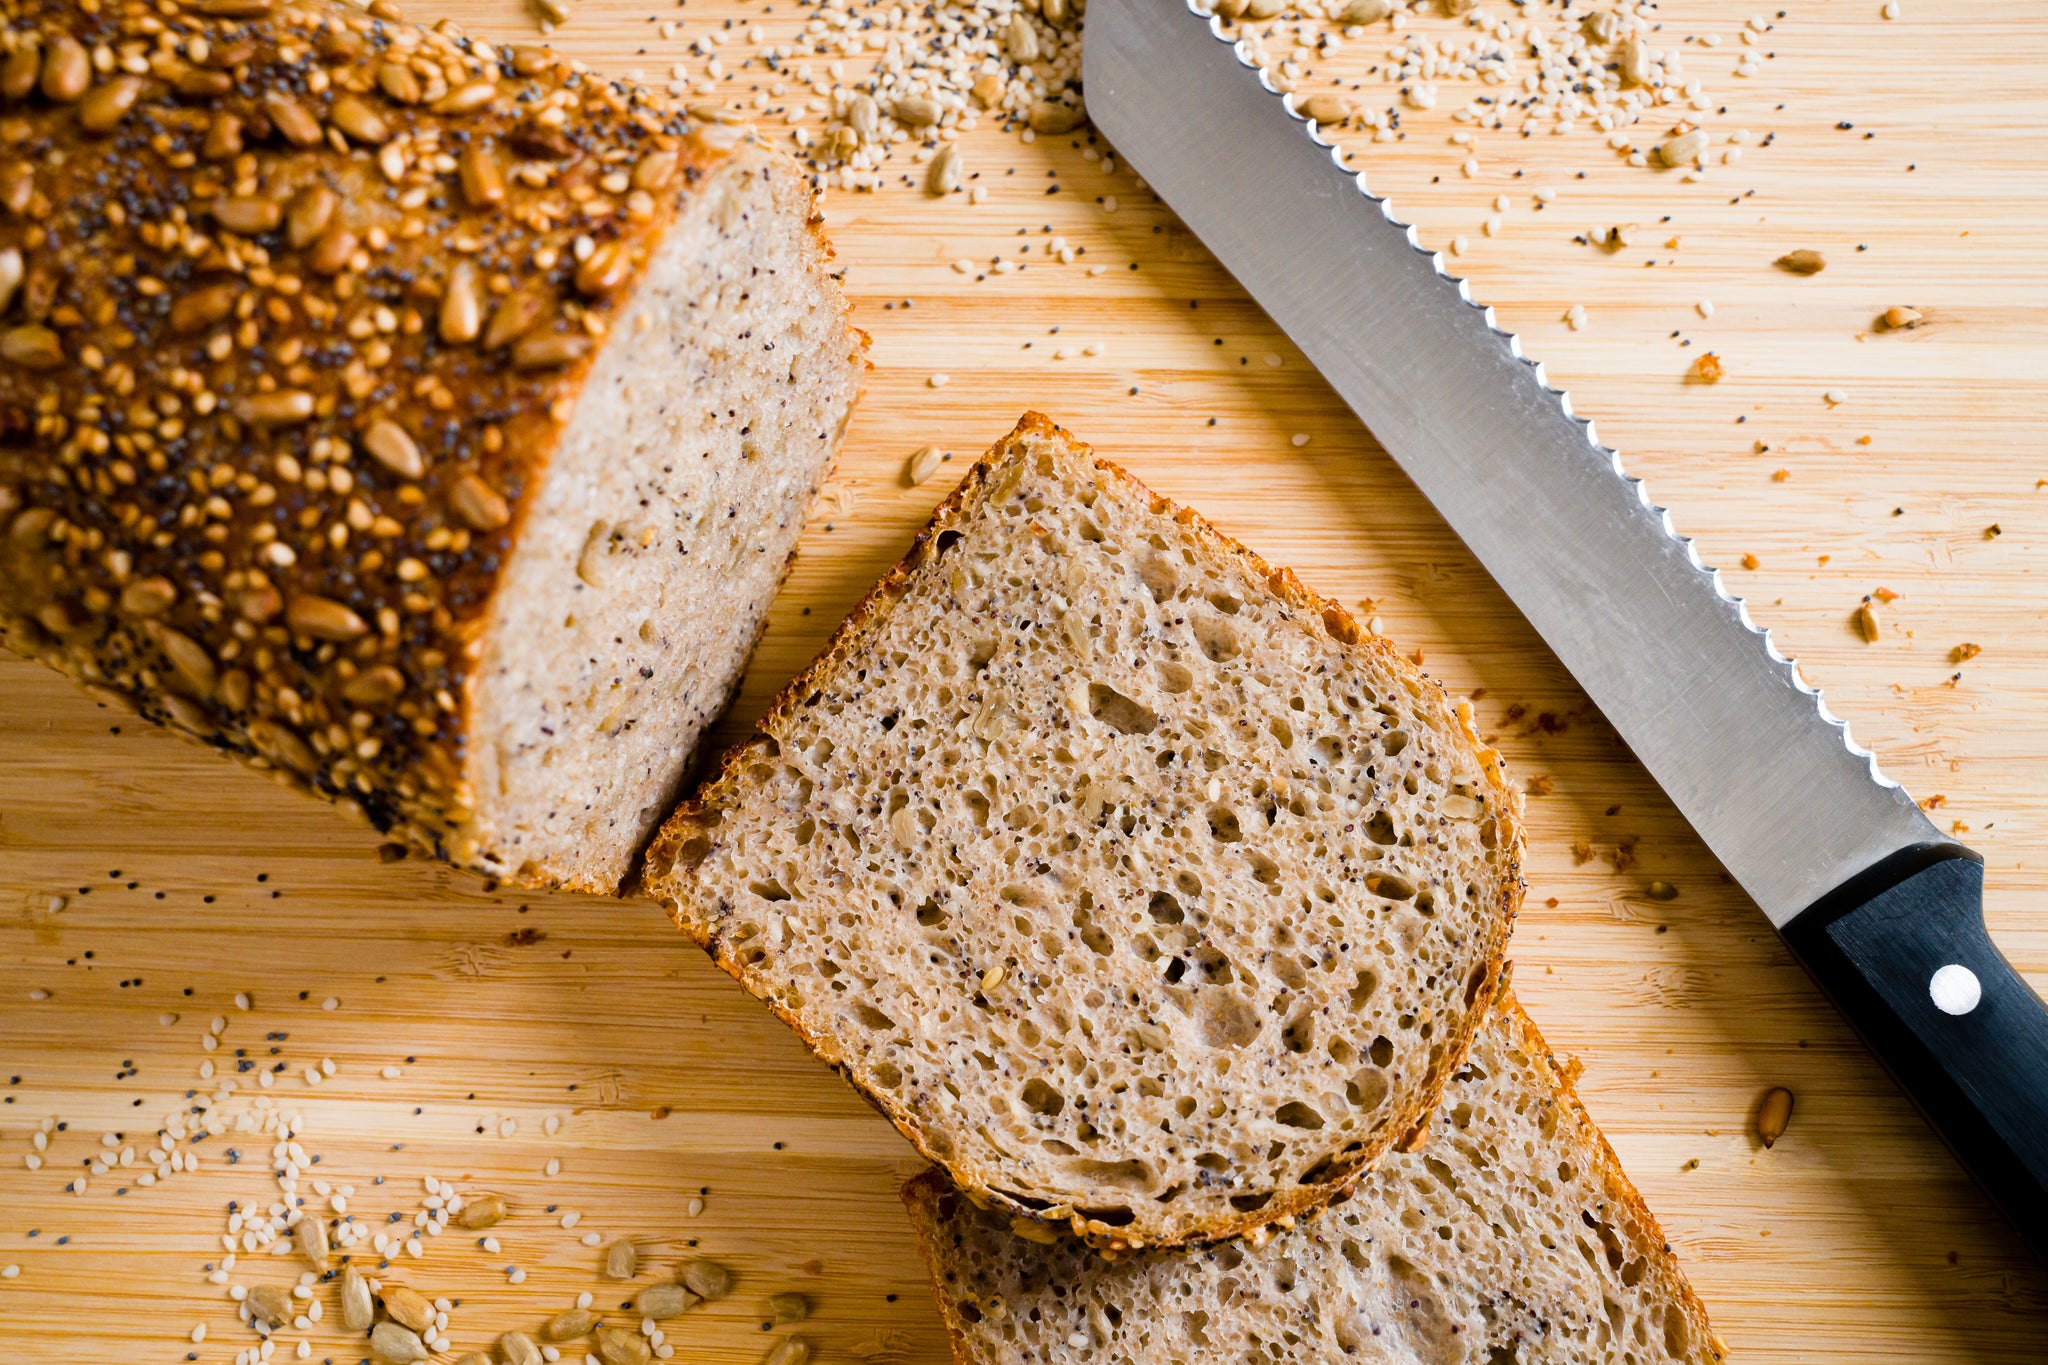 Two slices of seeded sandwich bread sit on a wooden cutting board with the remaining whole loaf to the left and a bread knife to the right.